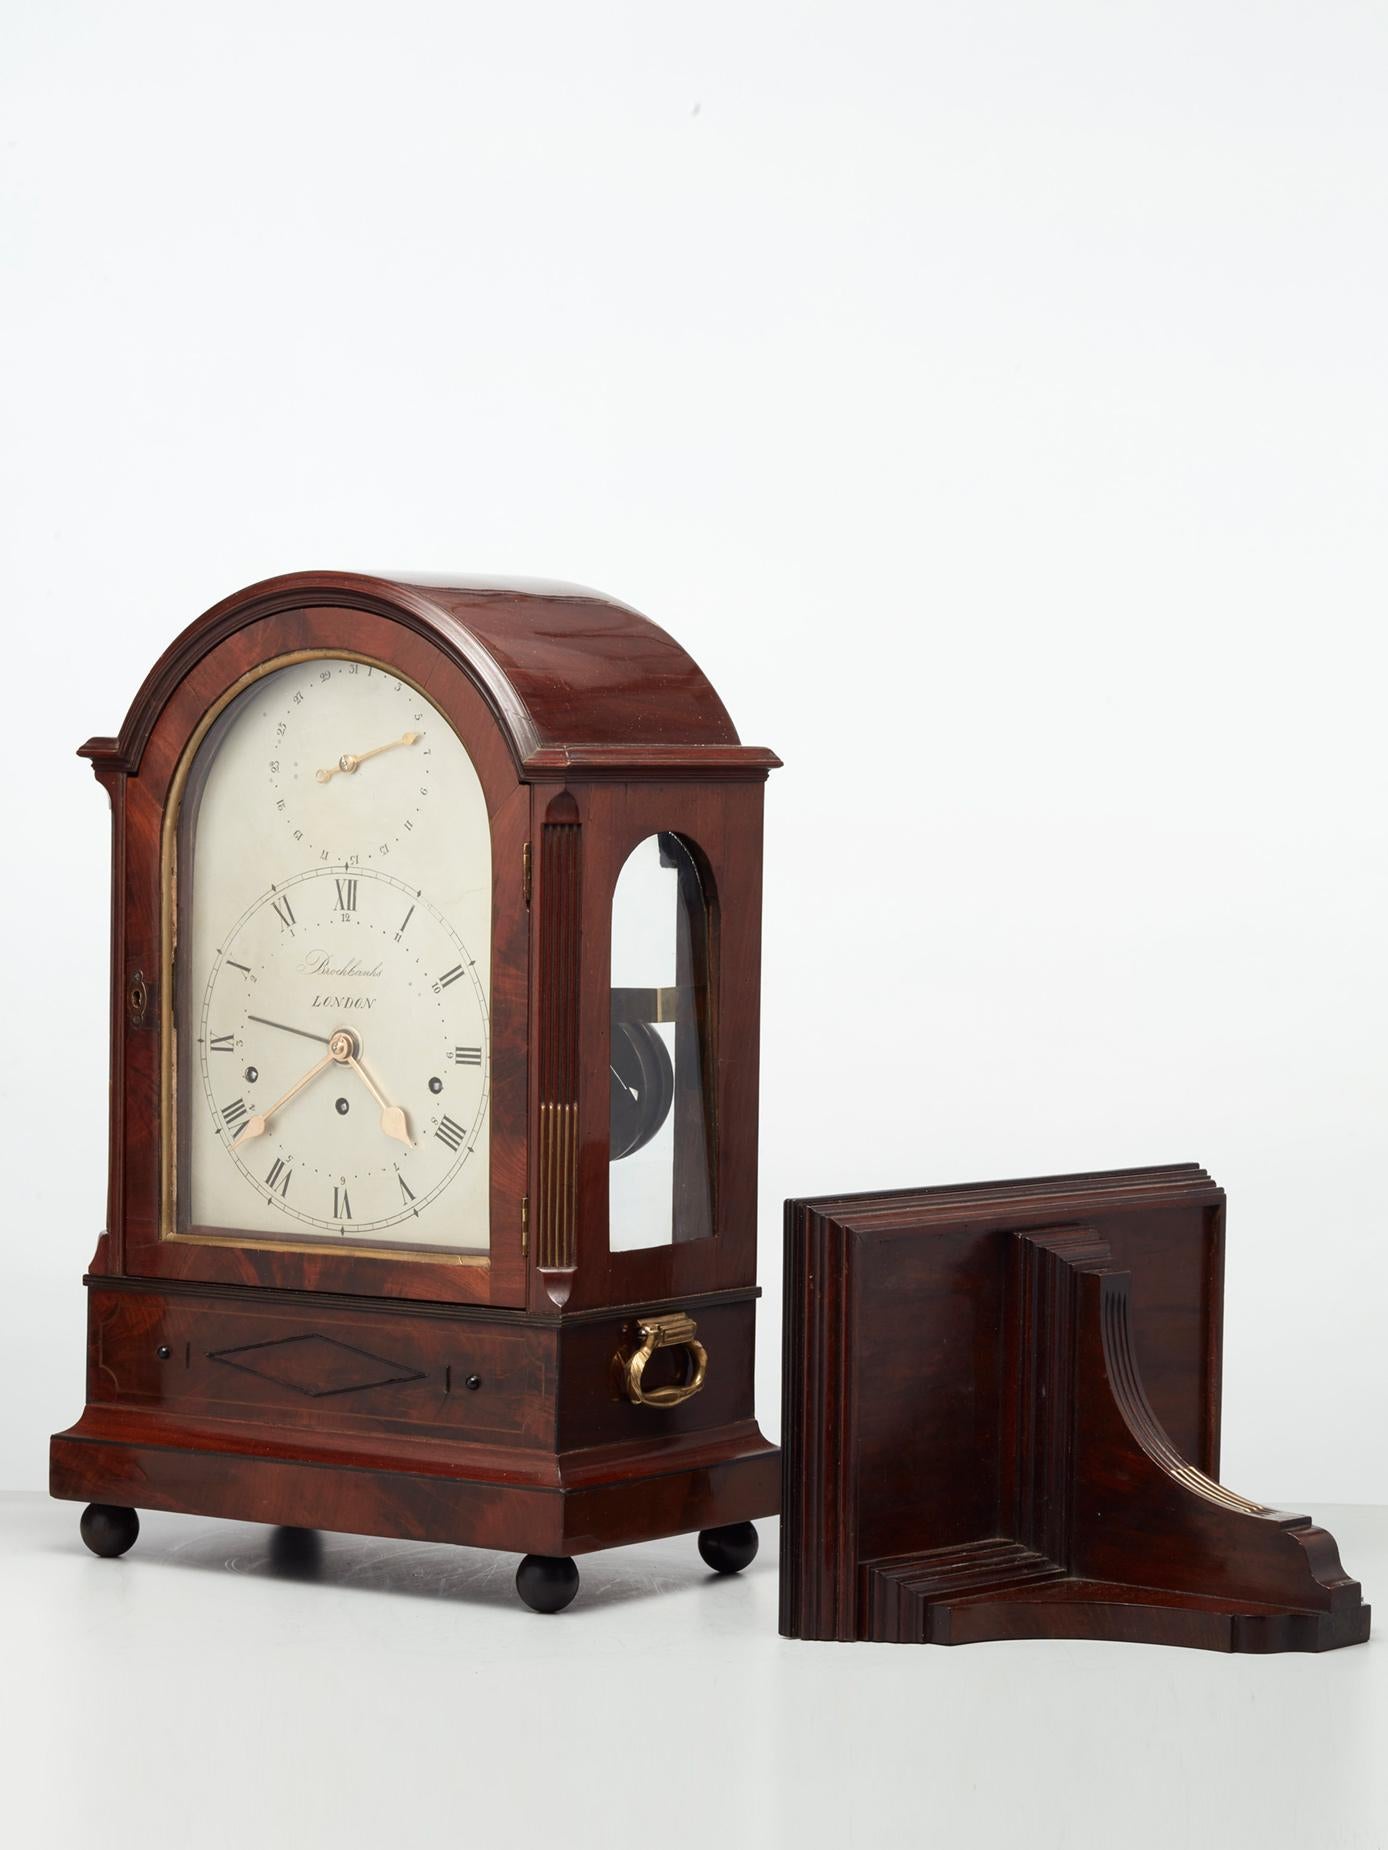 A very different English Regency, mid nineteenth century mahogany bracket clock with matching bracket, circa 1830.

The case with arched top and side arched glass apertures, the corners decorated with brass inlay. Below the dial, lovely ebony